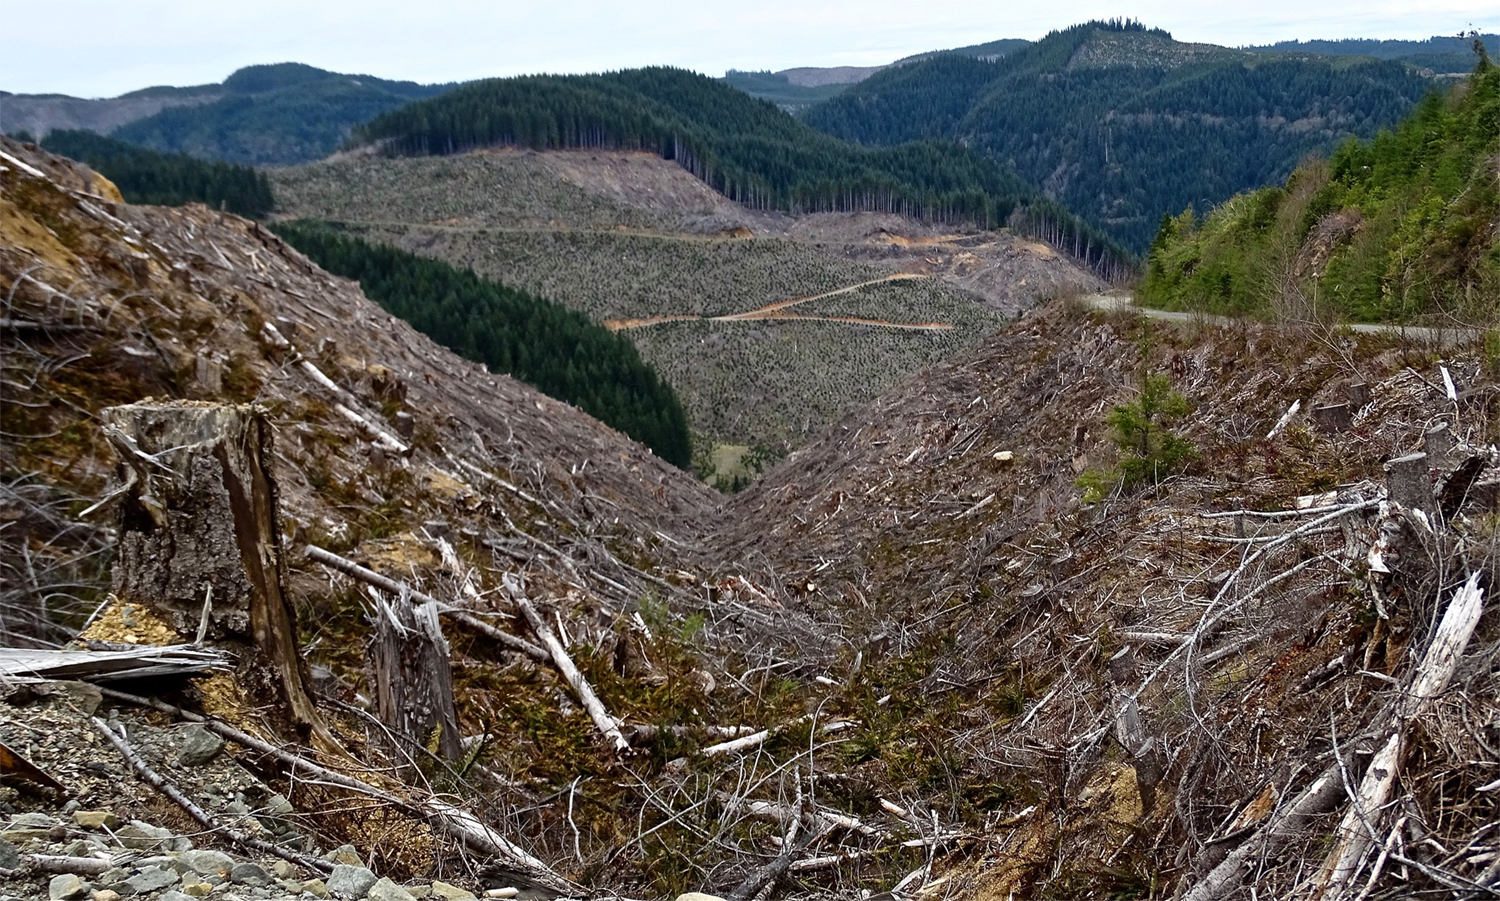 A nasty clearcut by the Weyerhaeuser company in the Oregon Coast Range (photo by Francis Eatherington).